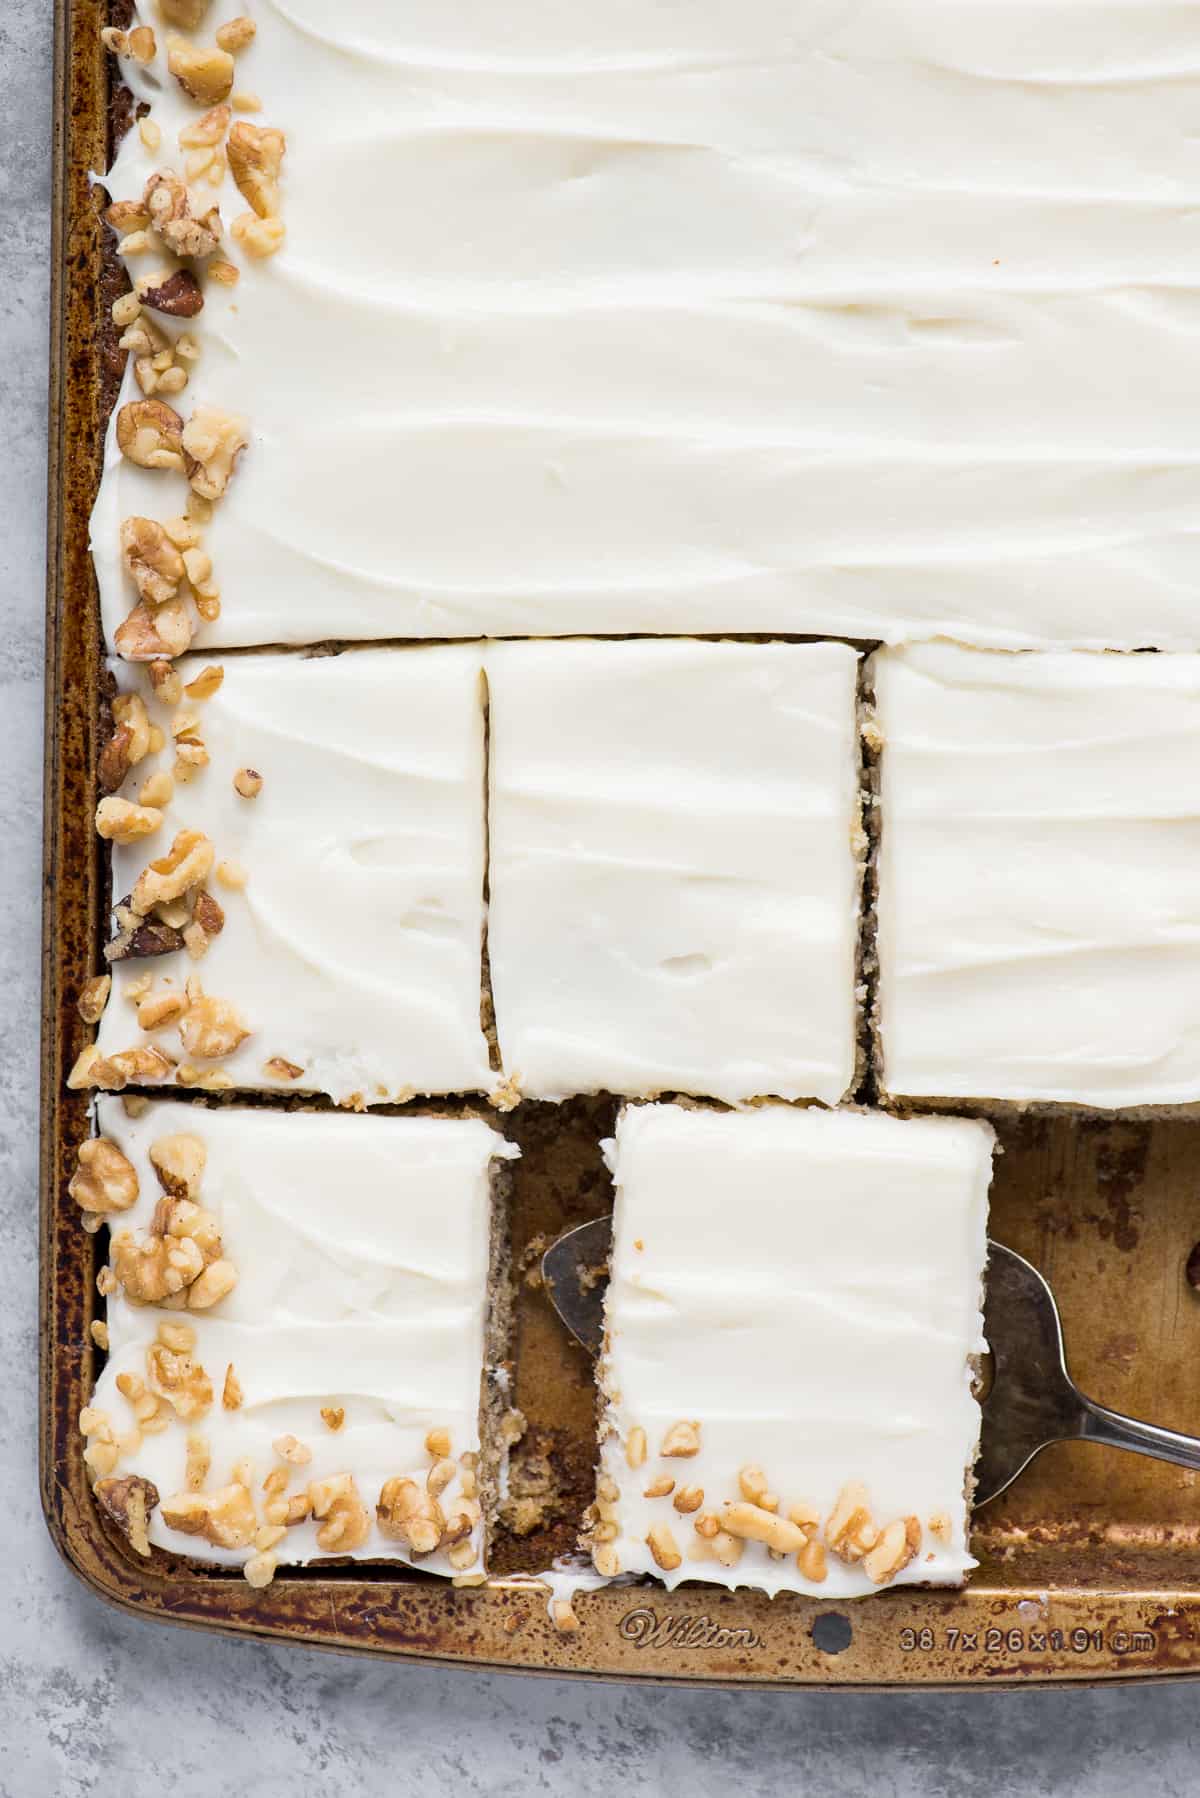 banana bars with cream cheese frosting and walnuts in sheet pan